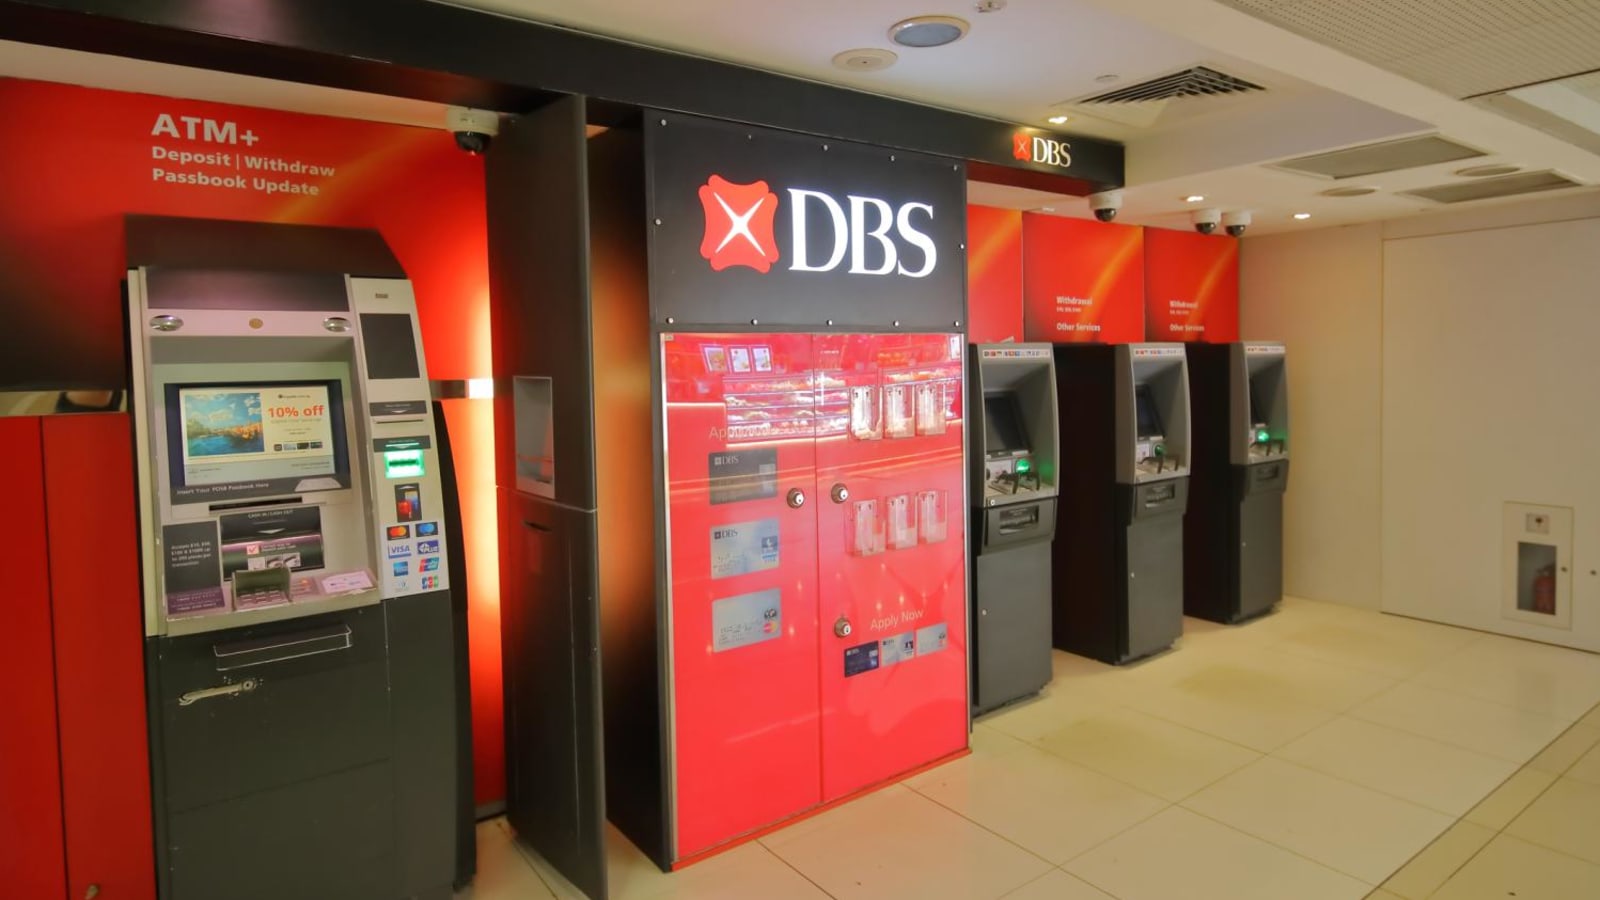 DBS warns of SMS phishing scam ‘actively targeting’ customers